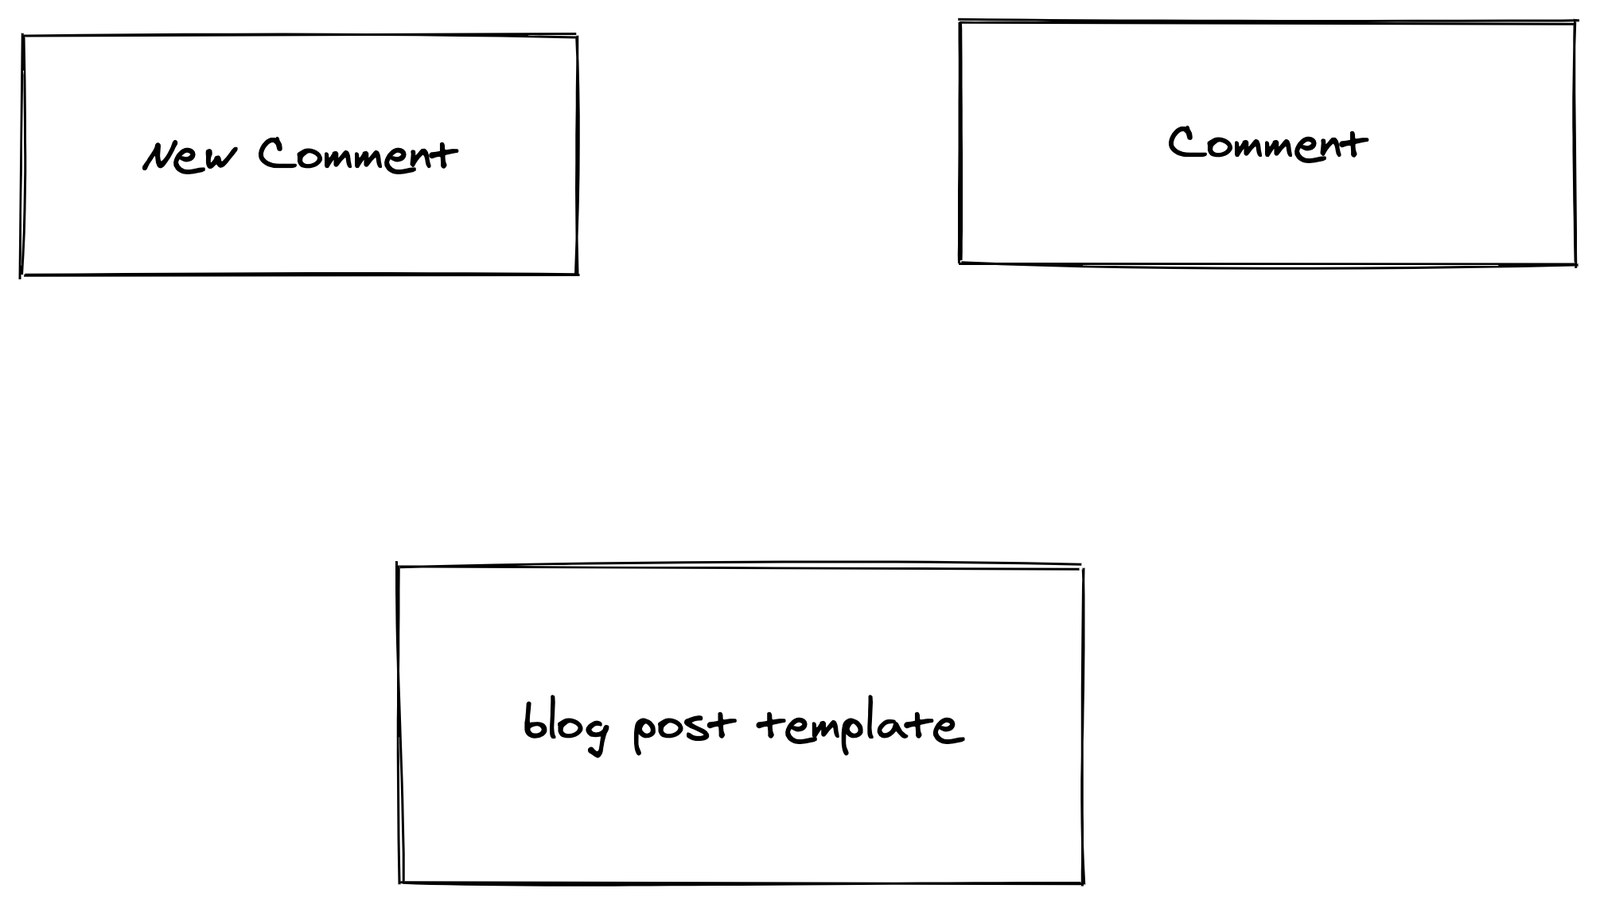 Gatsby starter blog comments system workflow